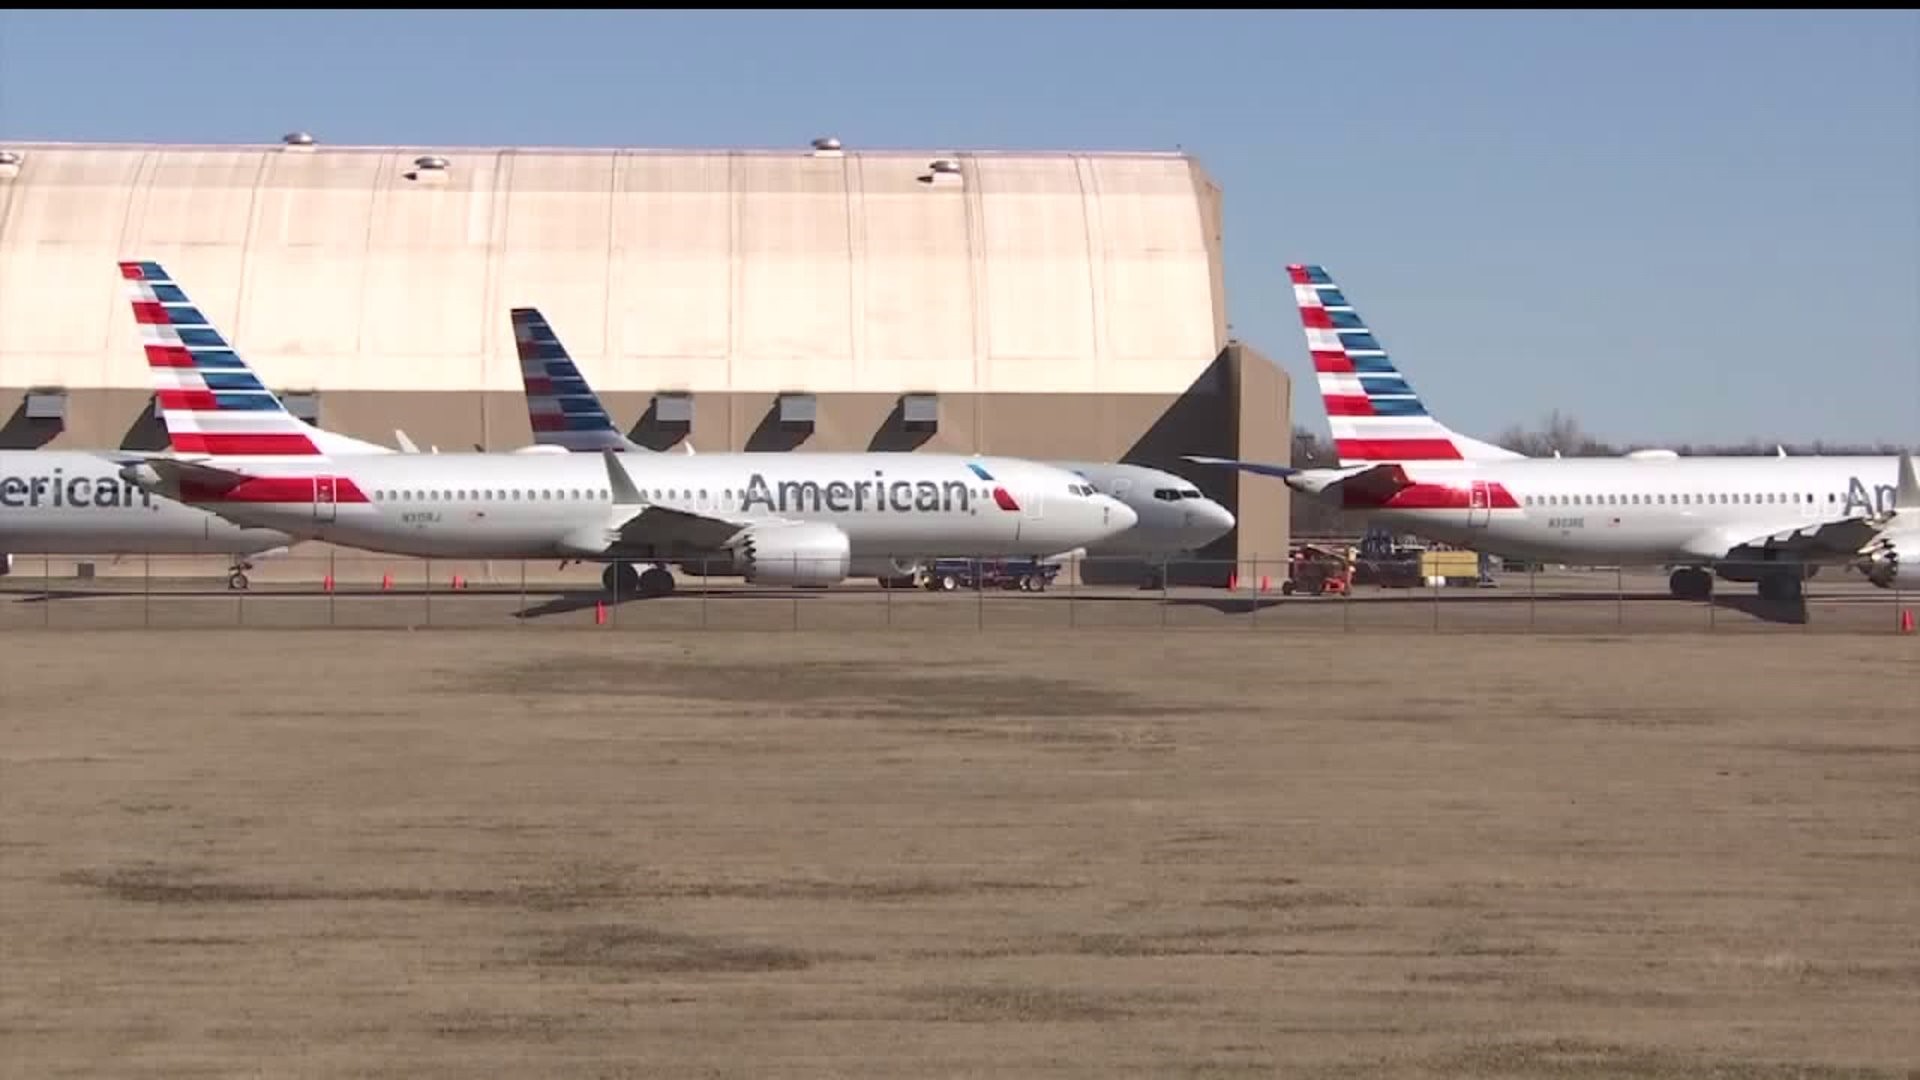 If you`re flying American Air this summer, your trip may be impacted